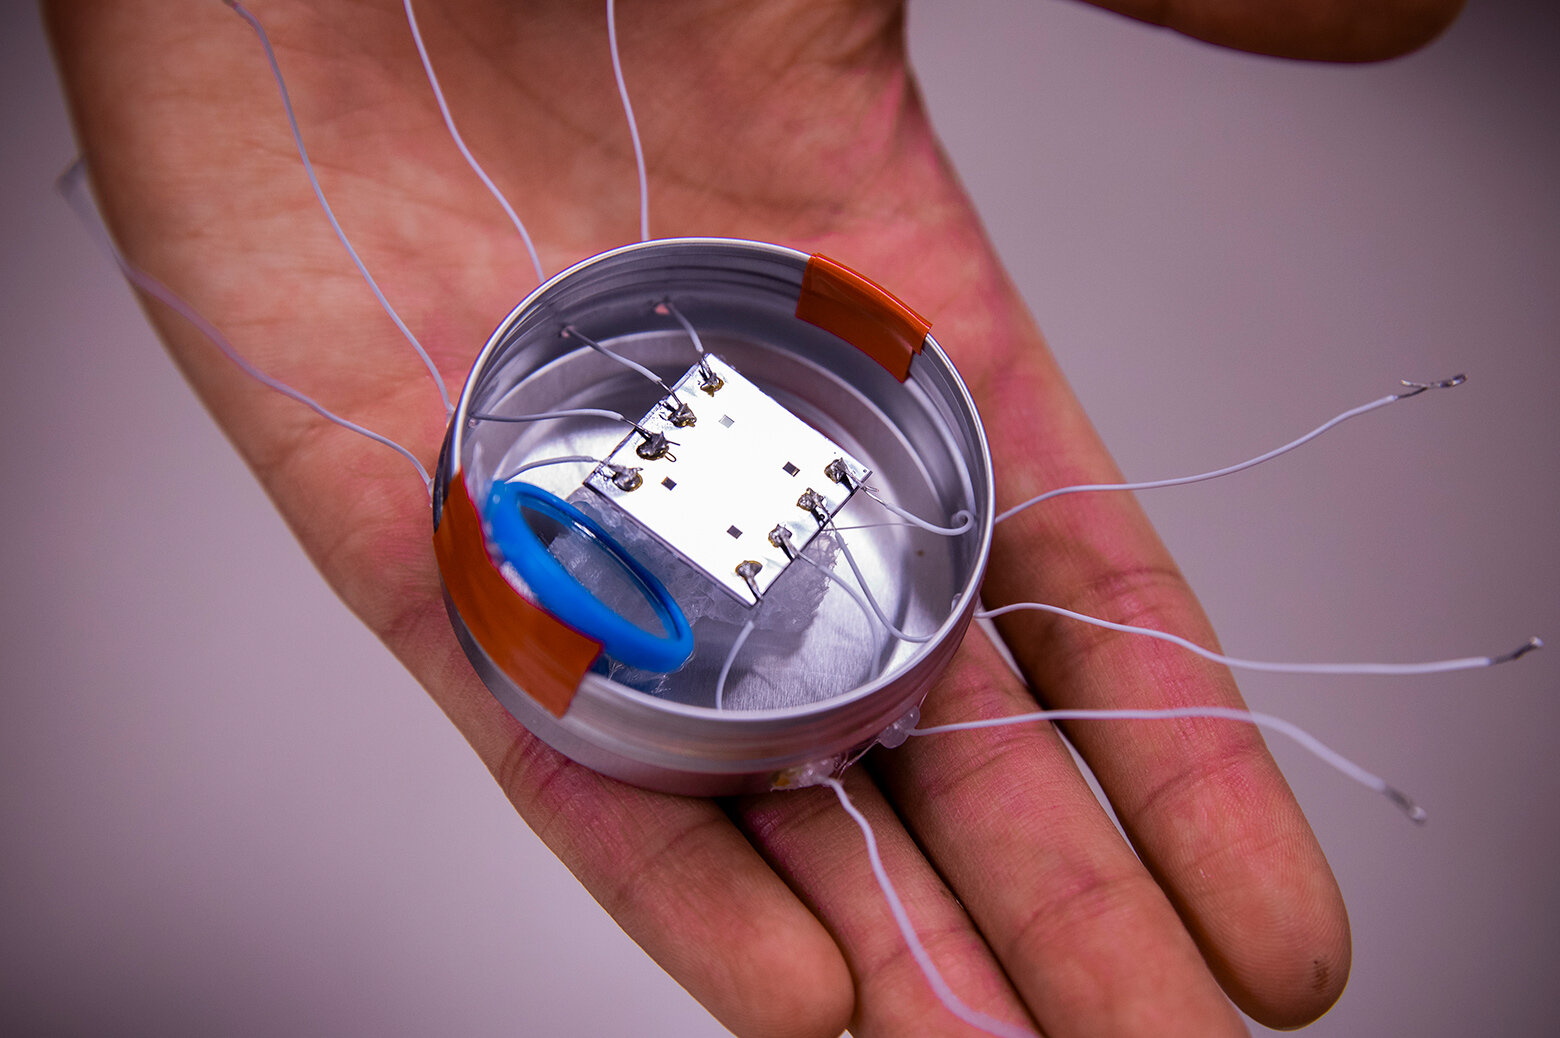 Scientists have created microrobots that change shape to perform various tasks